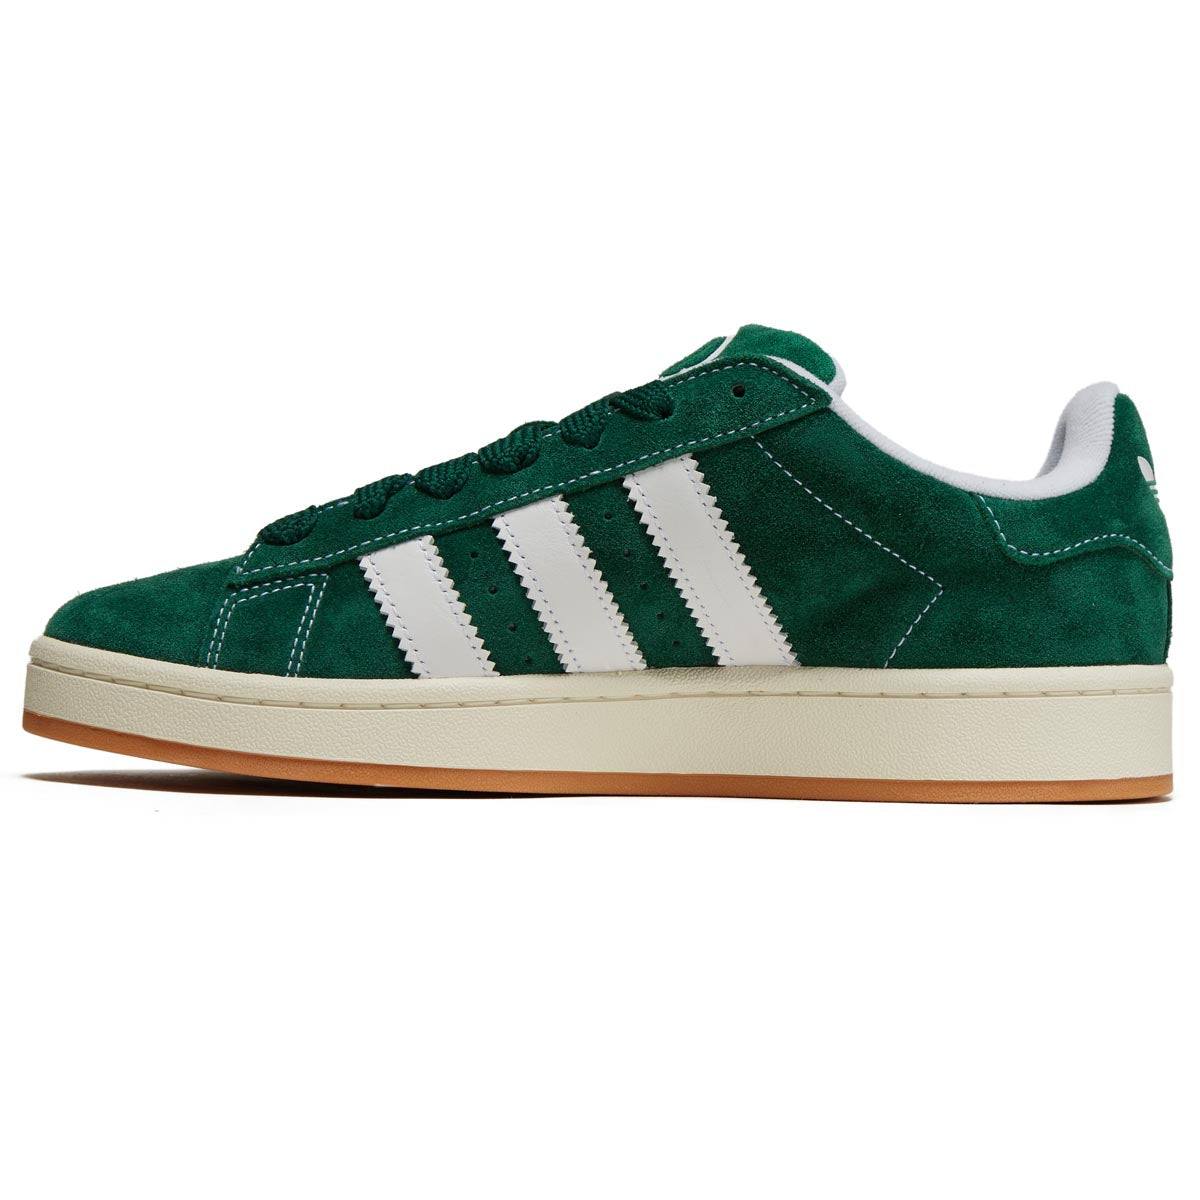 Adidas Campus 00s Shoes - Dark Green/Ftwr White/Off White image 2